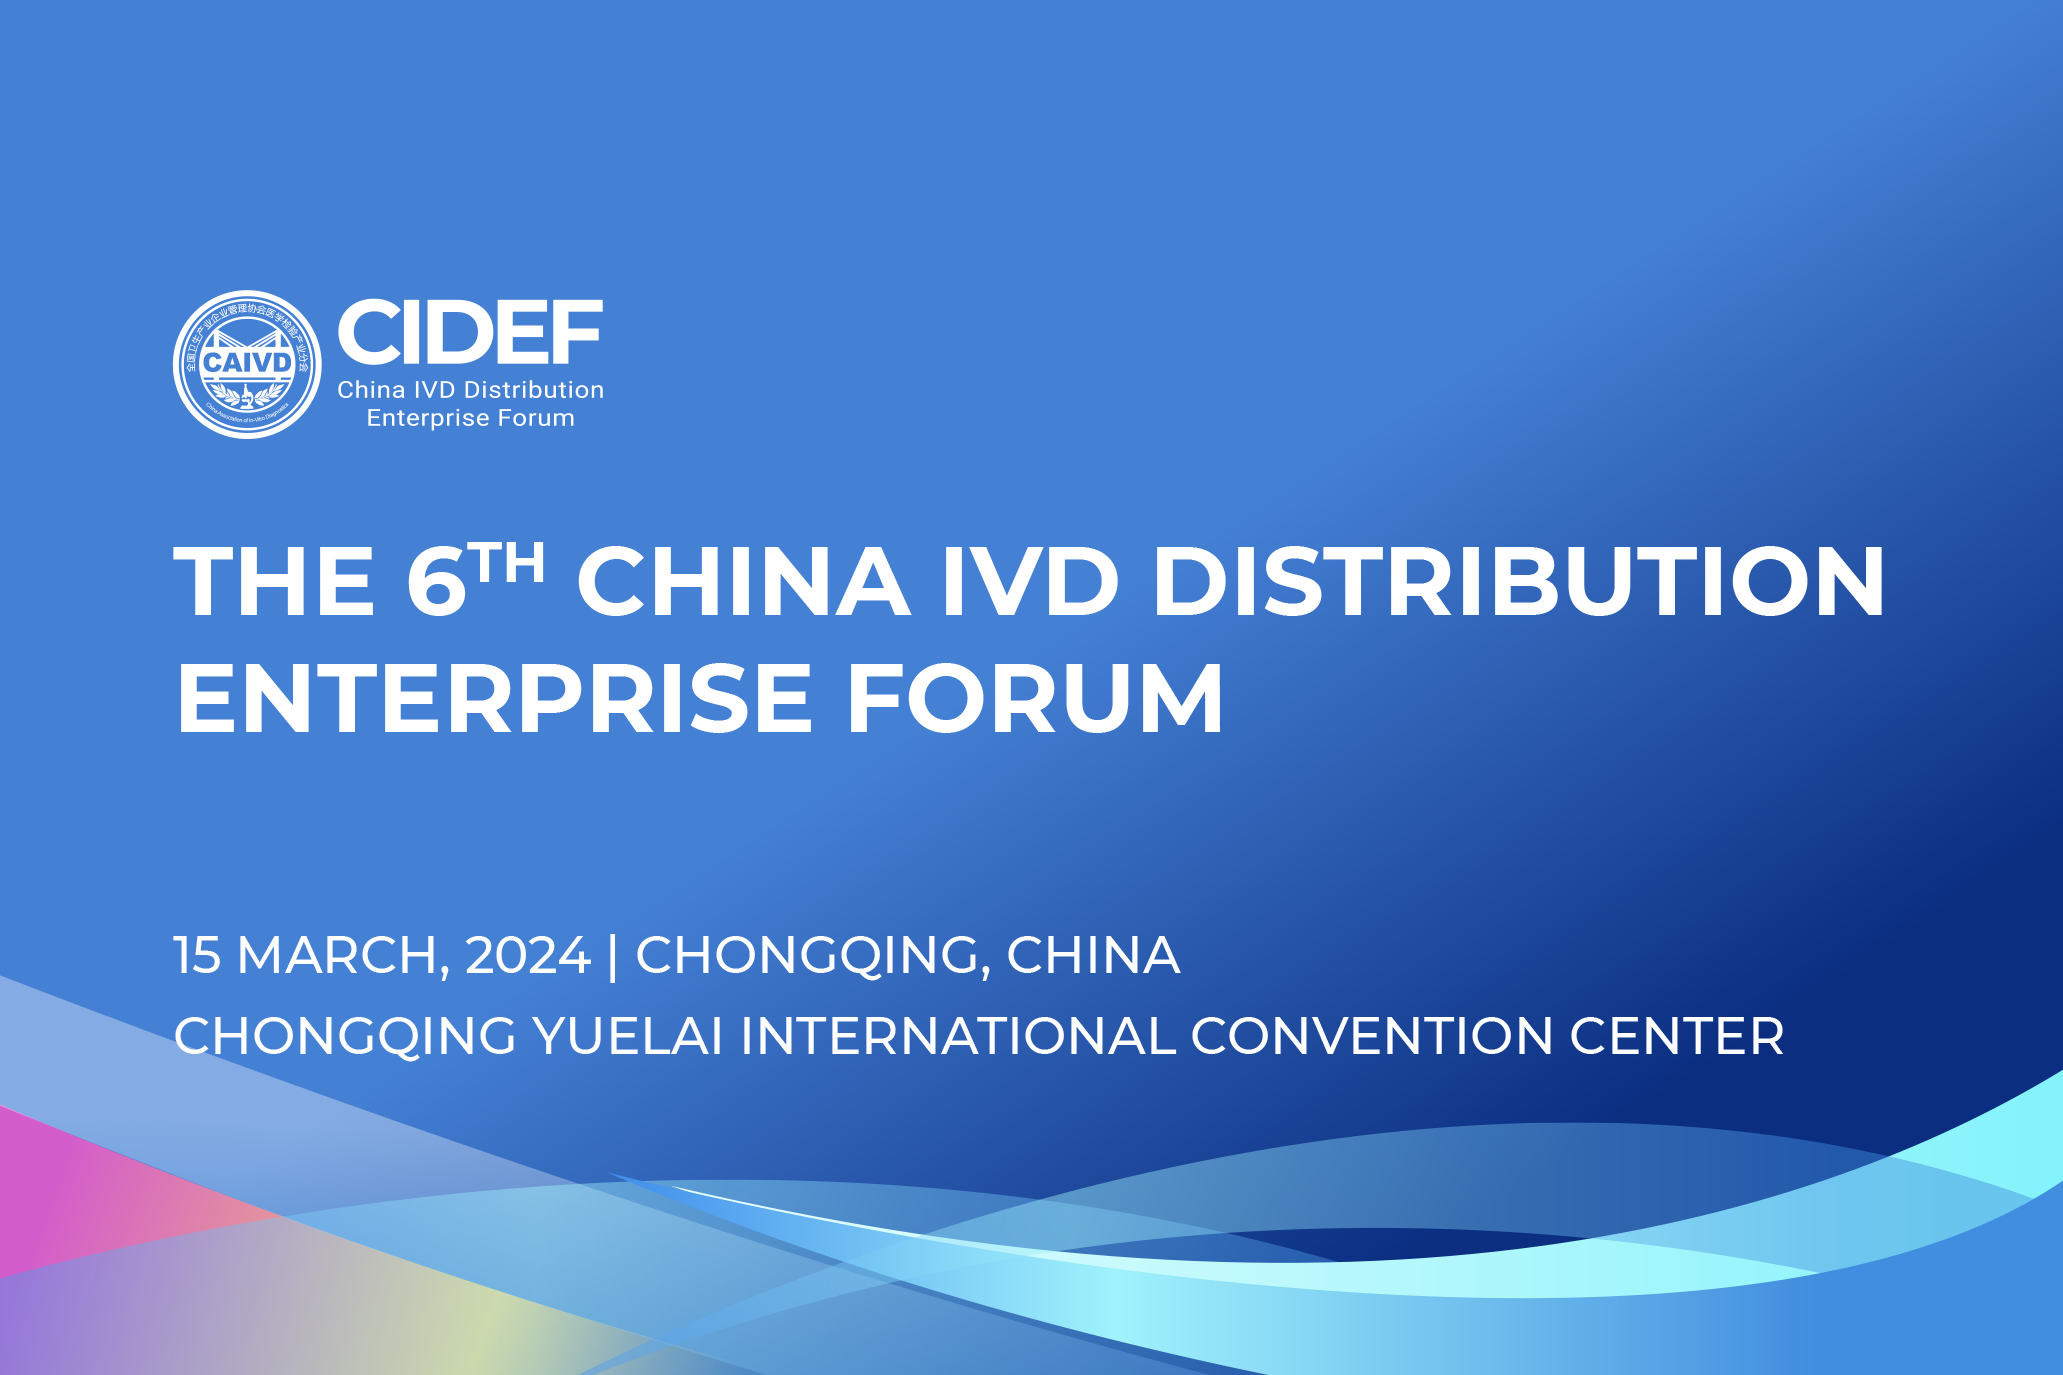 The 6th China IVD Distribution Enterprise Forum is scheduled on 15 March 2024